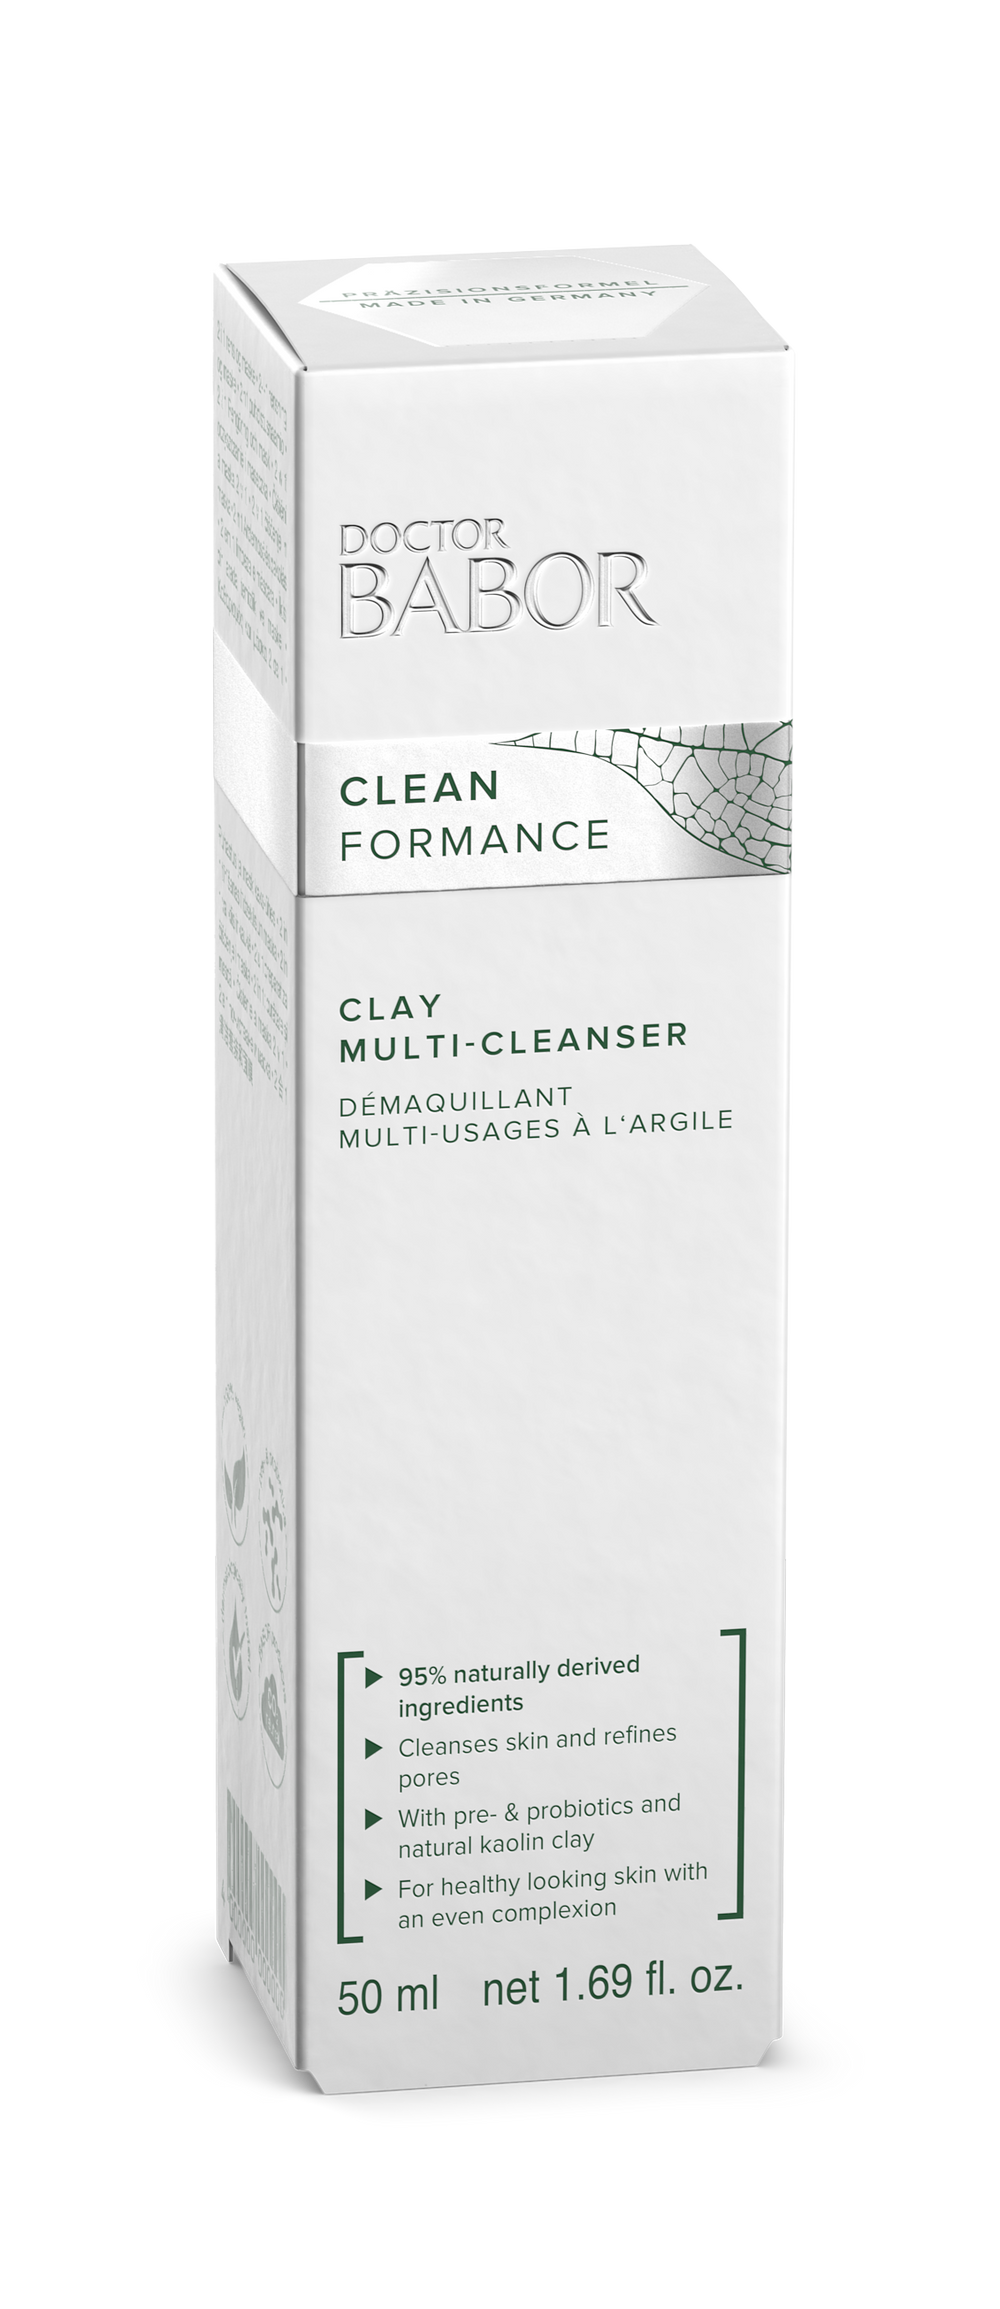 A 2-in-1 multi-functional product. Daily cleanser: Removes make-up, impurities, and refines pores without drying out the skin.